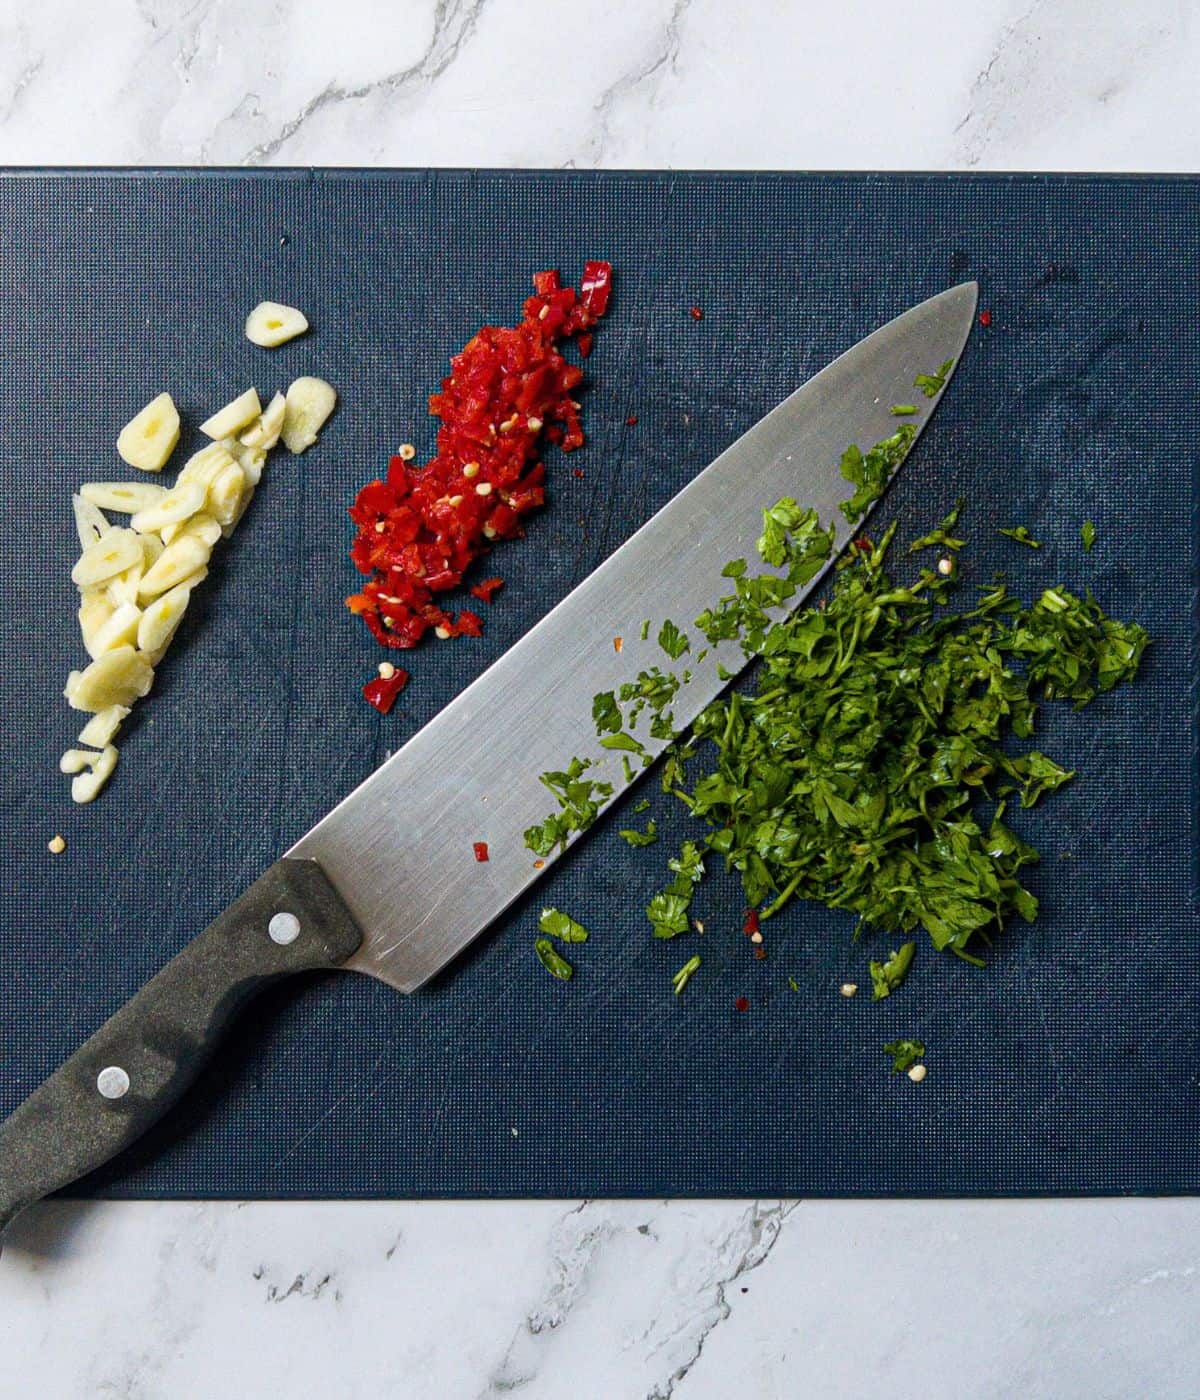 Chopped garlic, chilli and parsley on a chopping board with a knife.